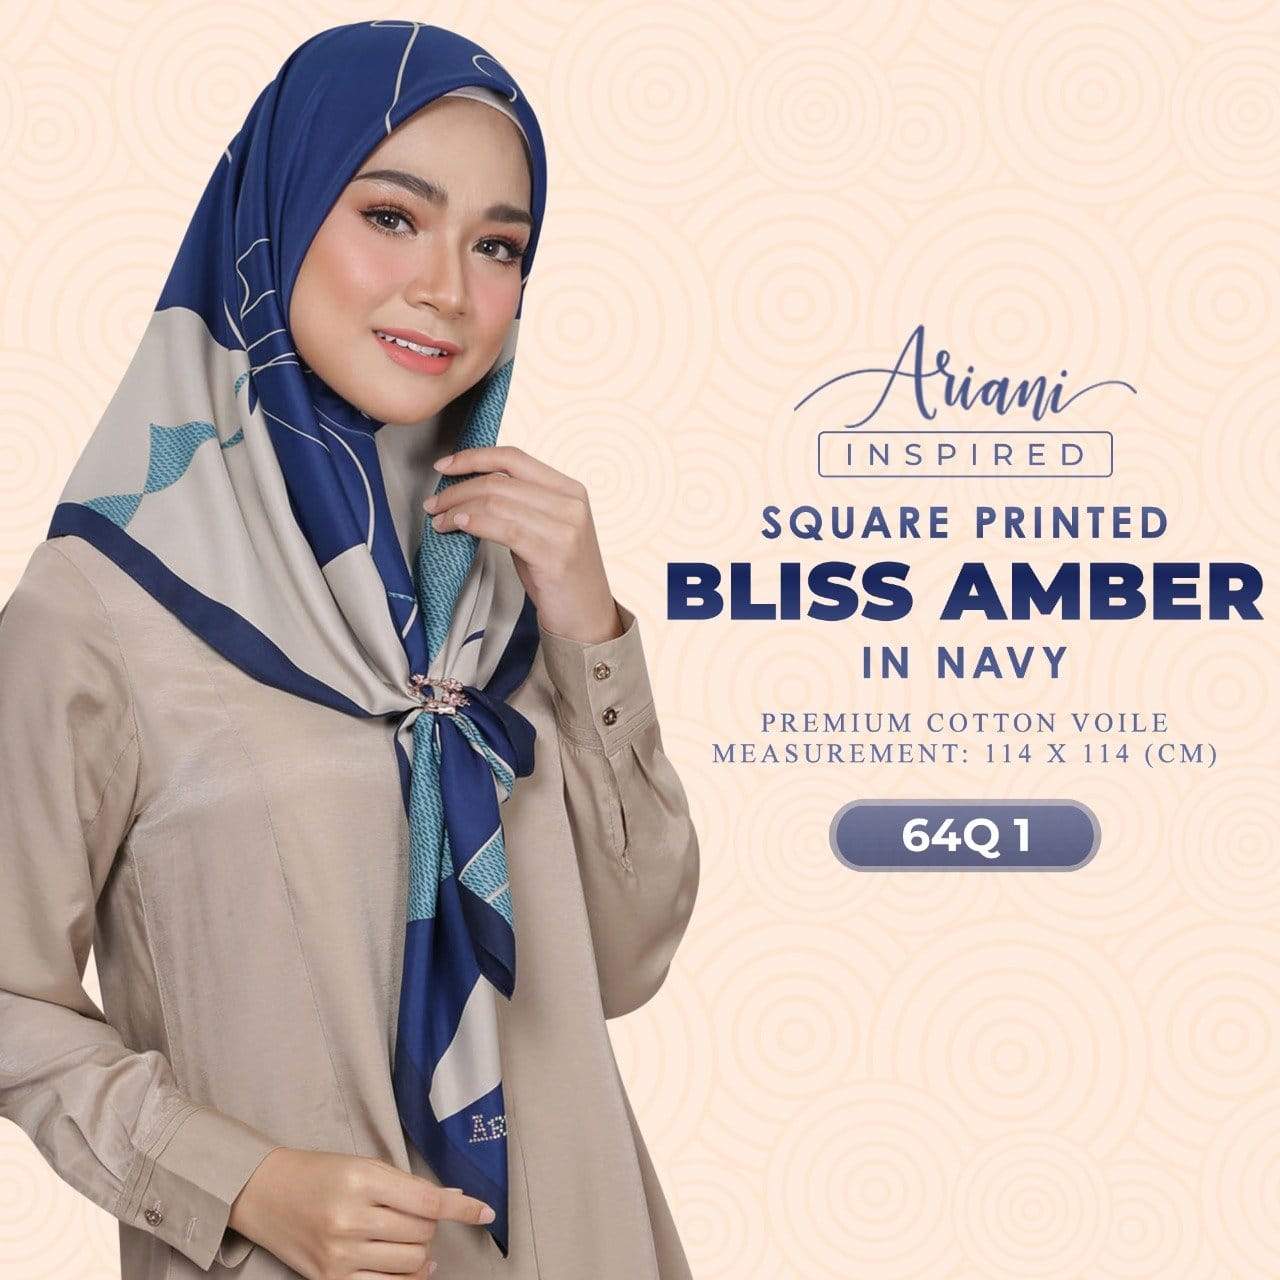 Ariani Inspired Series Bliss Amber Printed SQ Collection